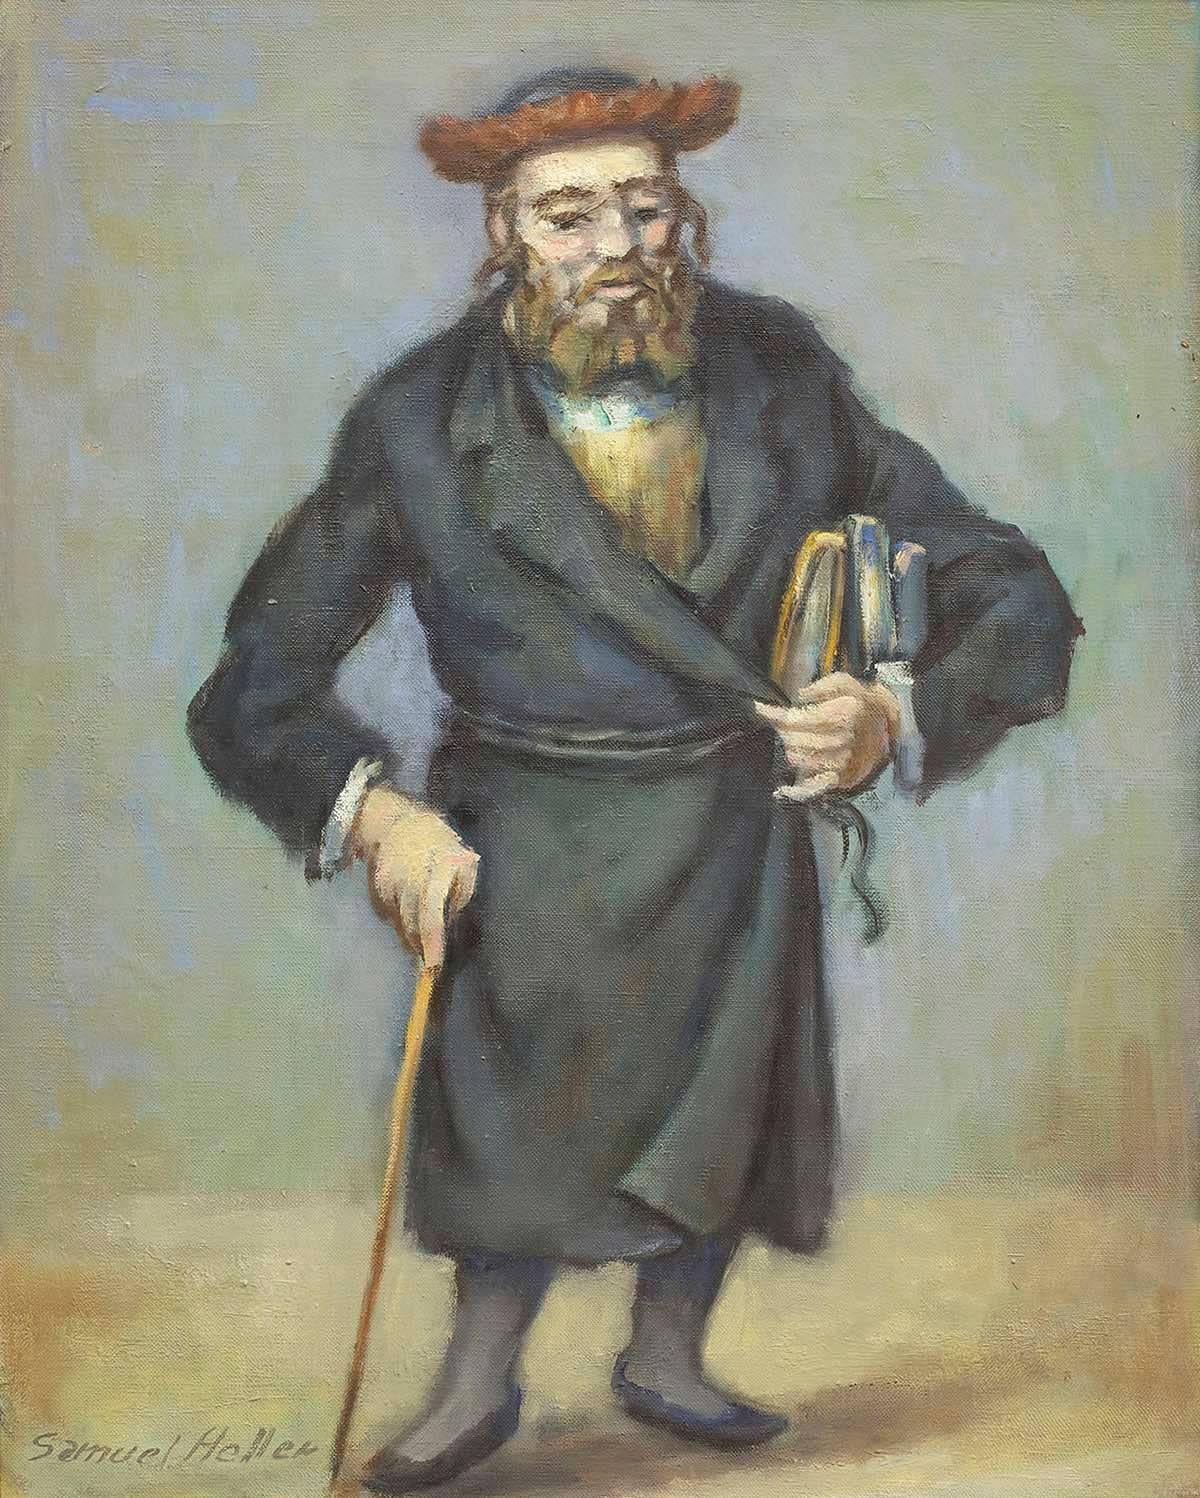 Rare Judaica Rabbi Oil Painting (JEWISH MAN HOLDING A CANE AND BOOKS) - Brown Figurative Painting by Samuel Heller